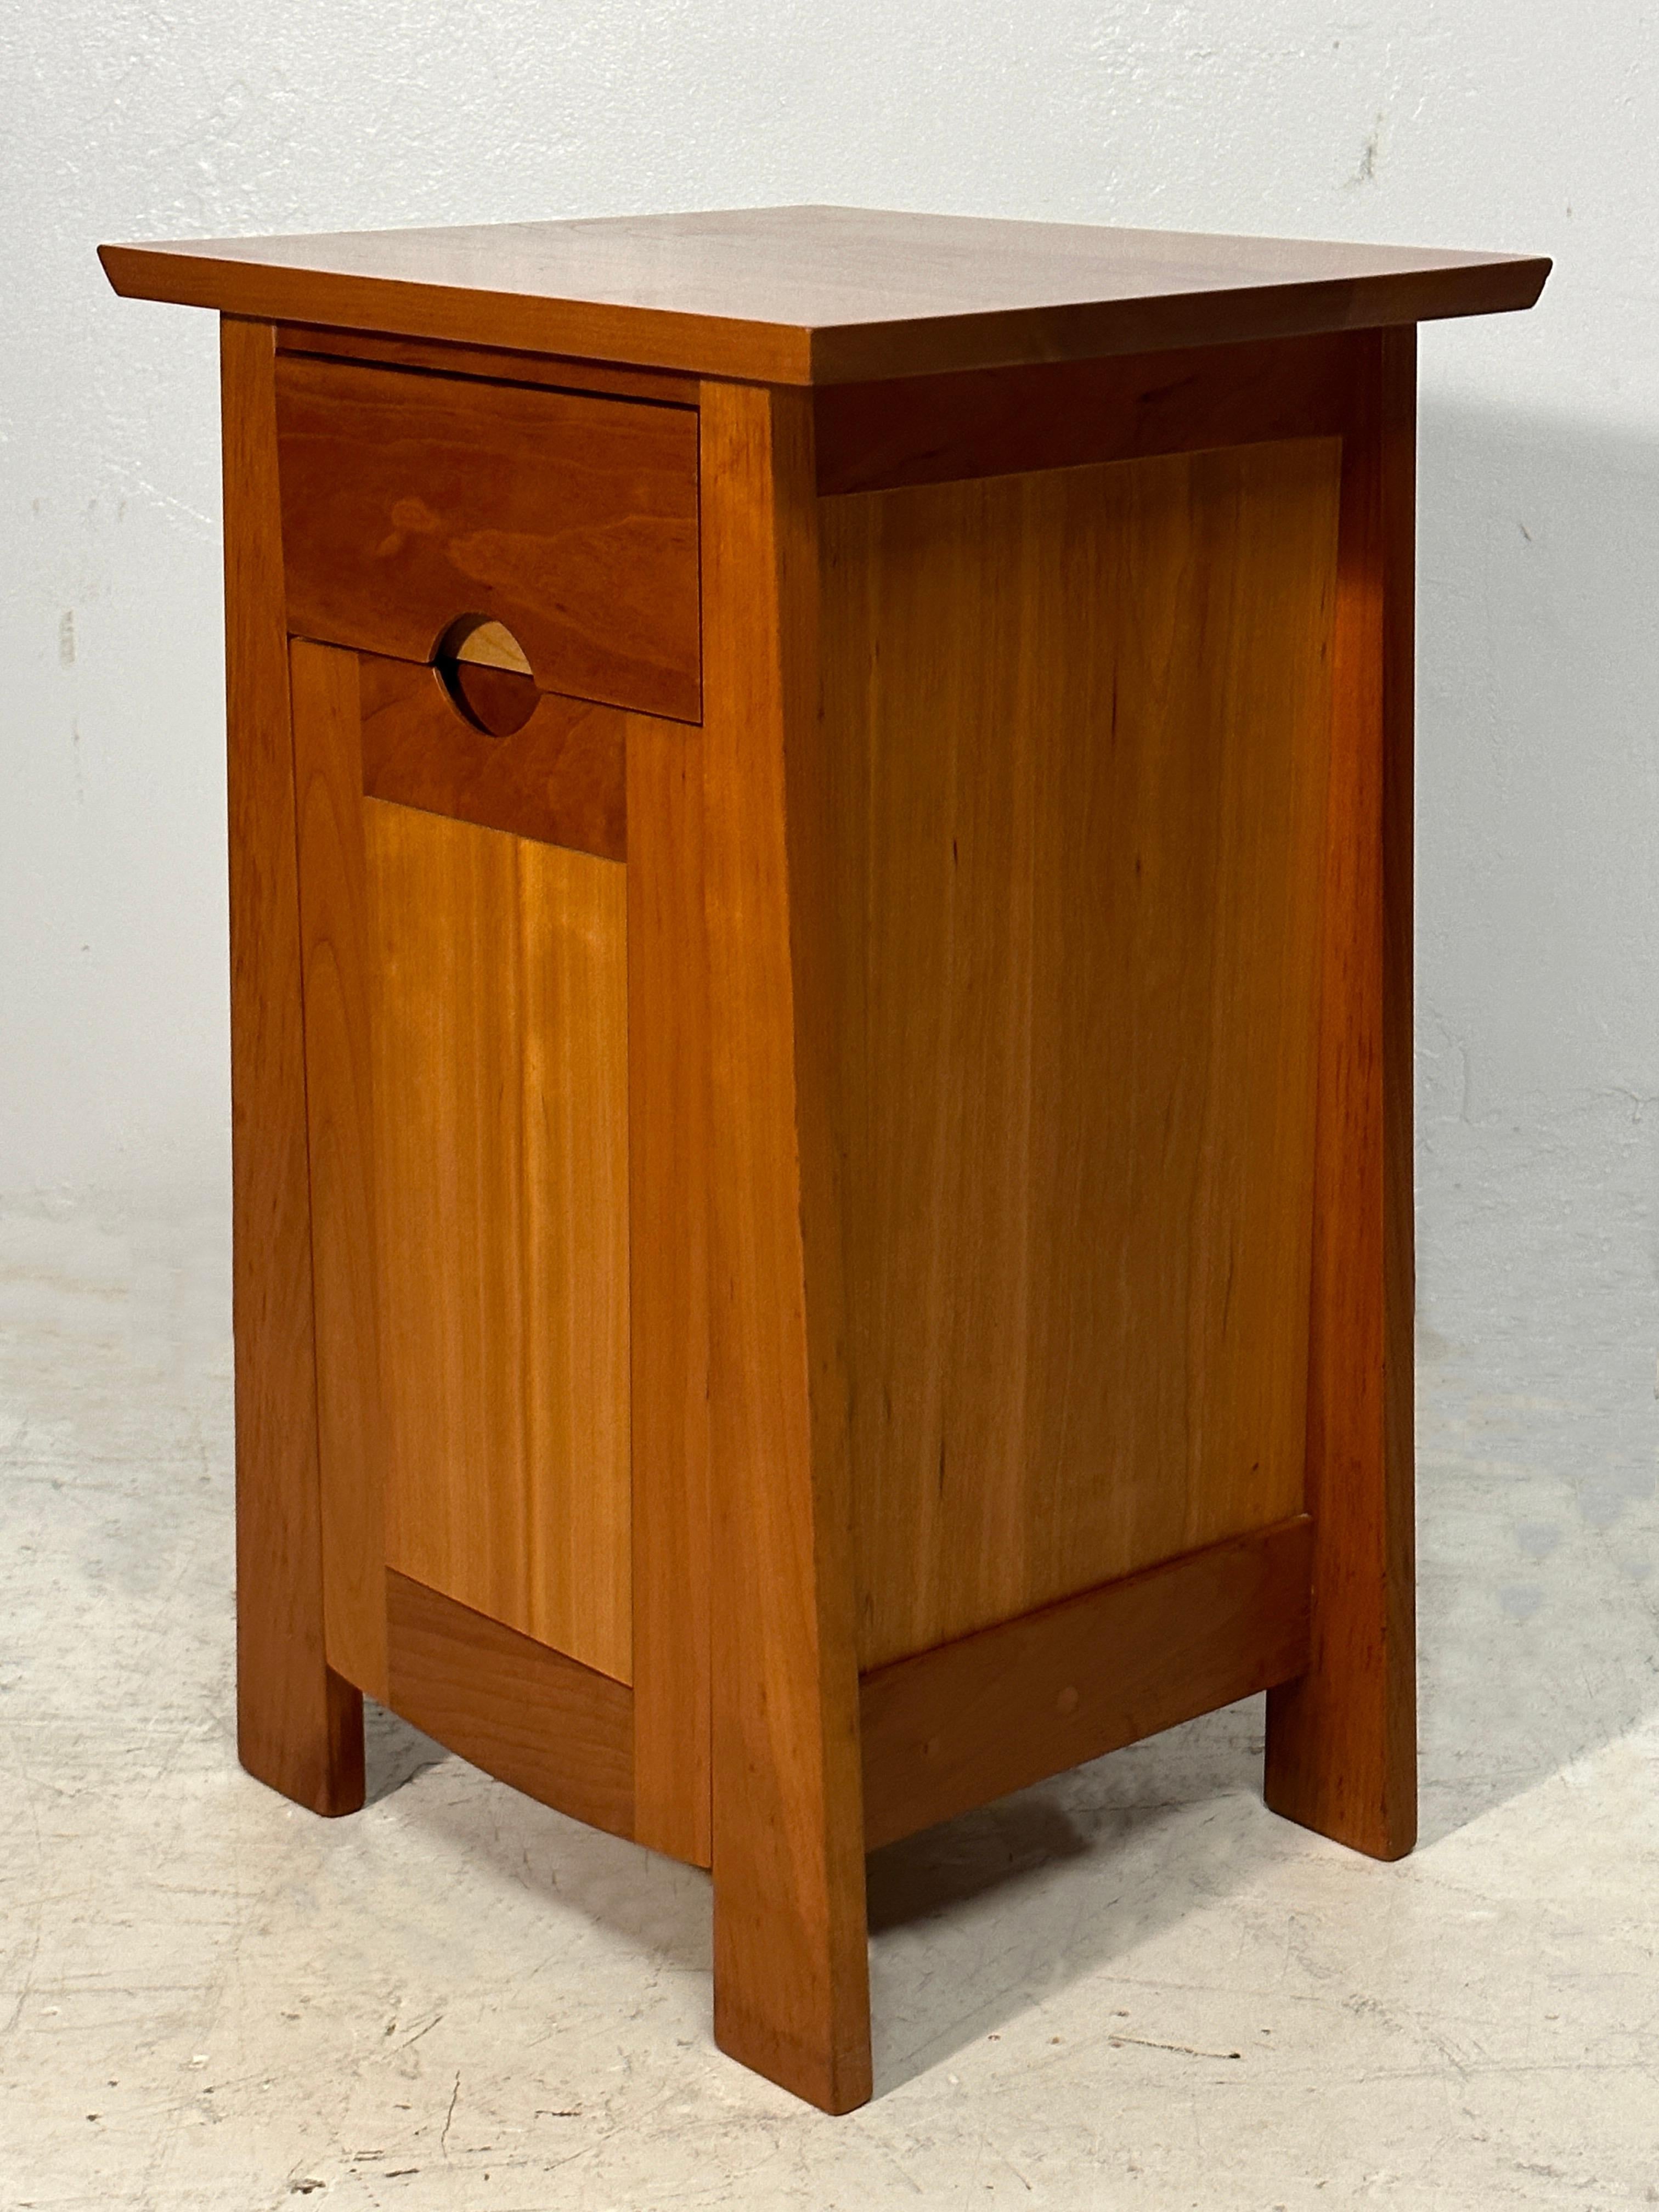 Roycroft Campus is the birthplace of the Arts & Crafts Movement in America. 
These nightstands, handcrafted by Roy-croft Renaissance are a perfect example of that period. Crafted from rich cherry wood, they embody the spirit of the new style which